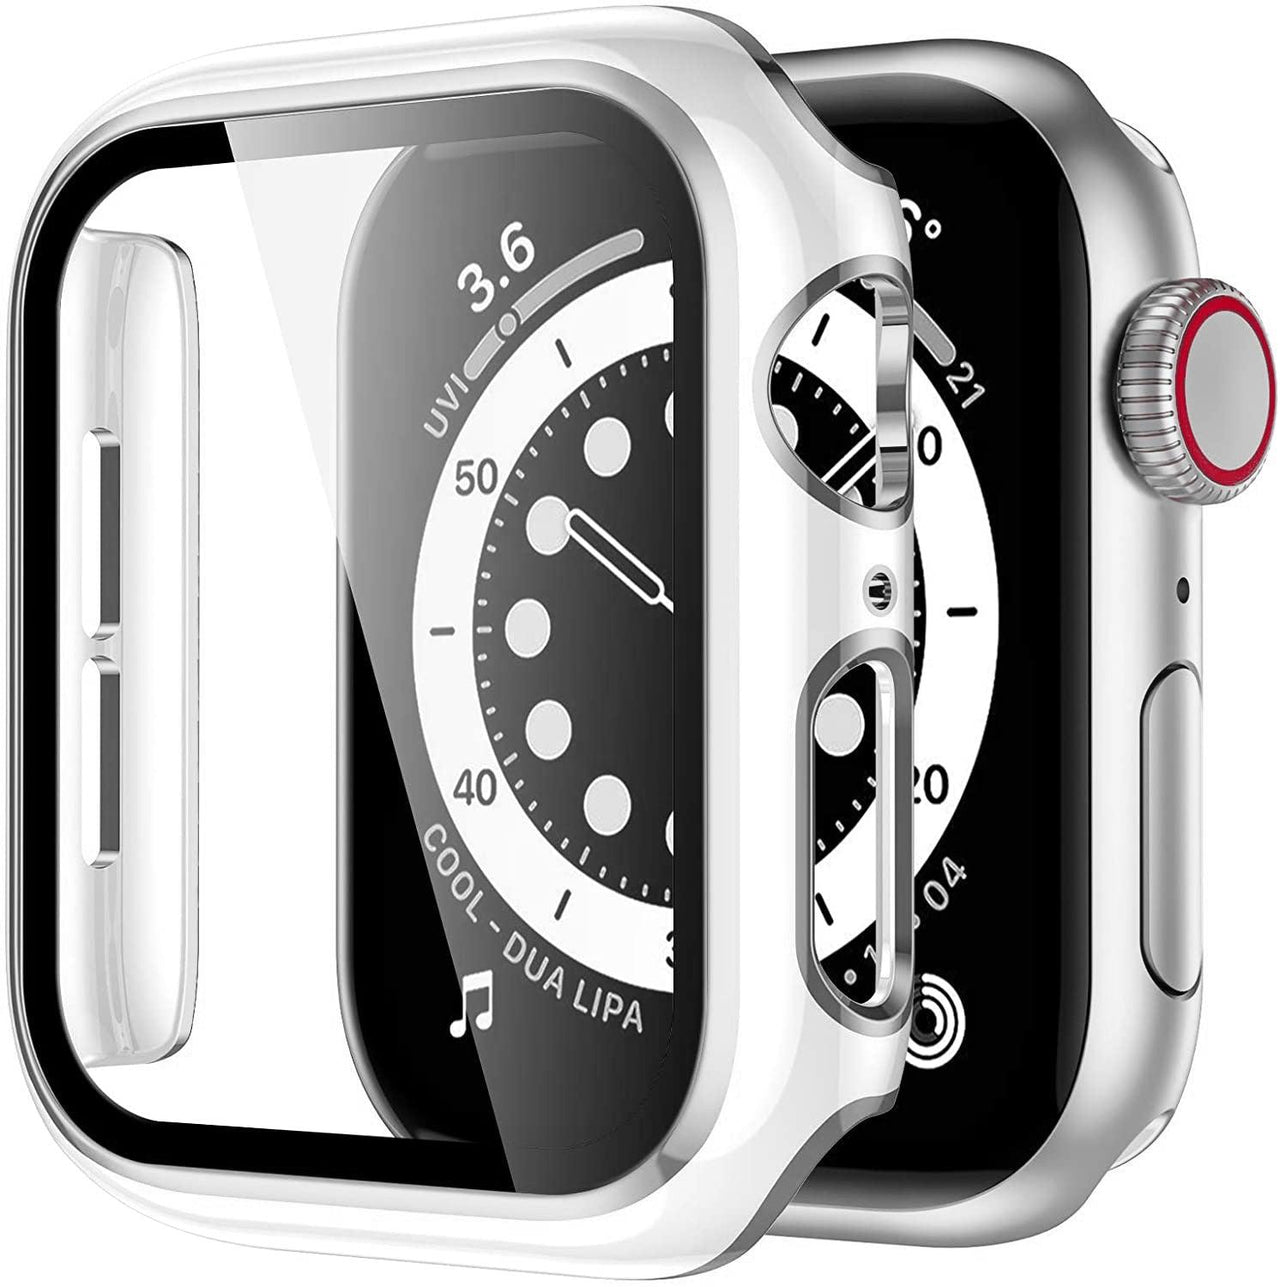 Shockproof Case and Glass Protector for Apple Watch - watchband.direct